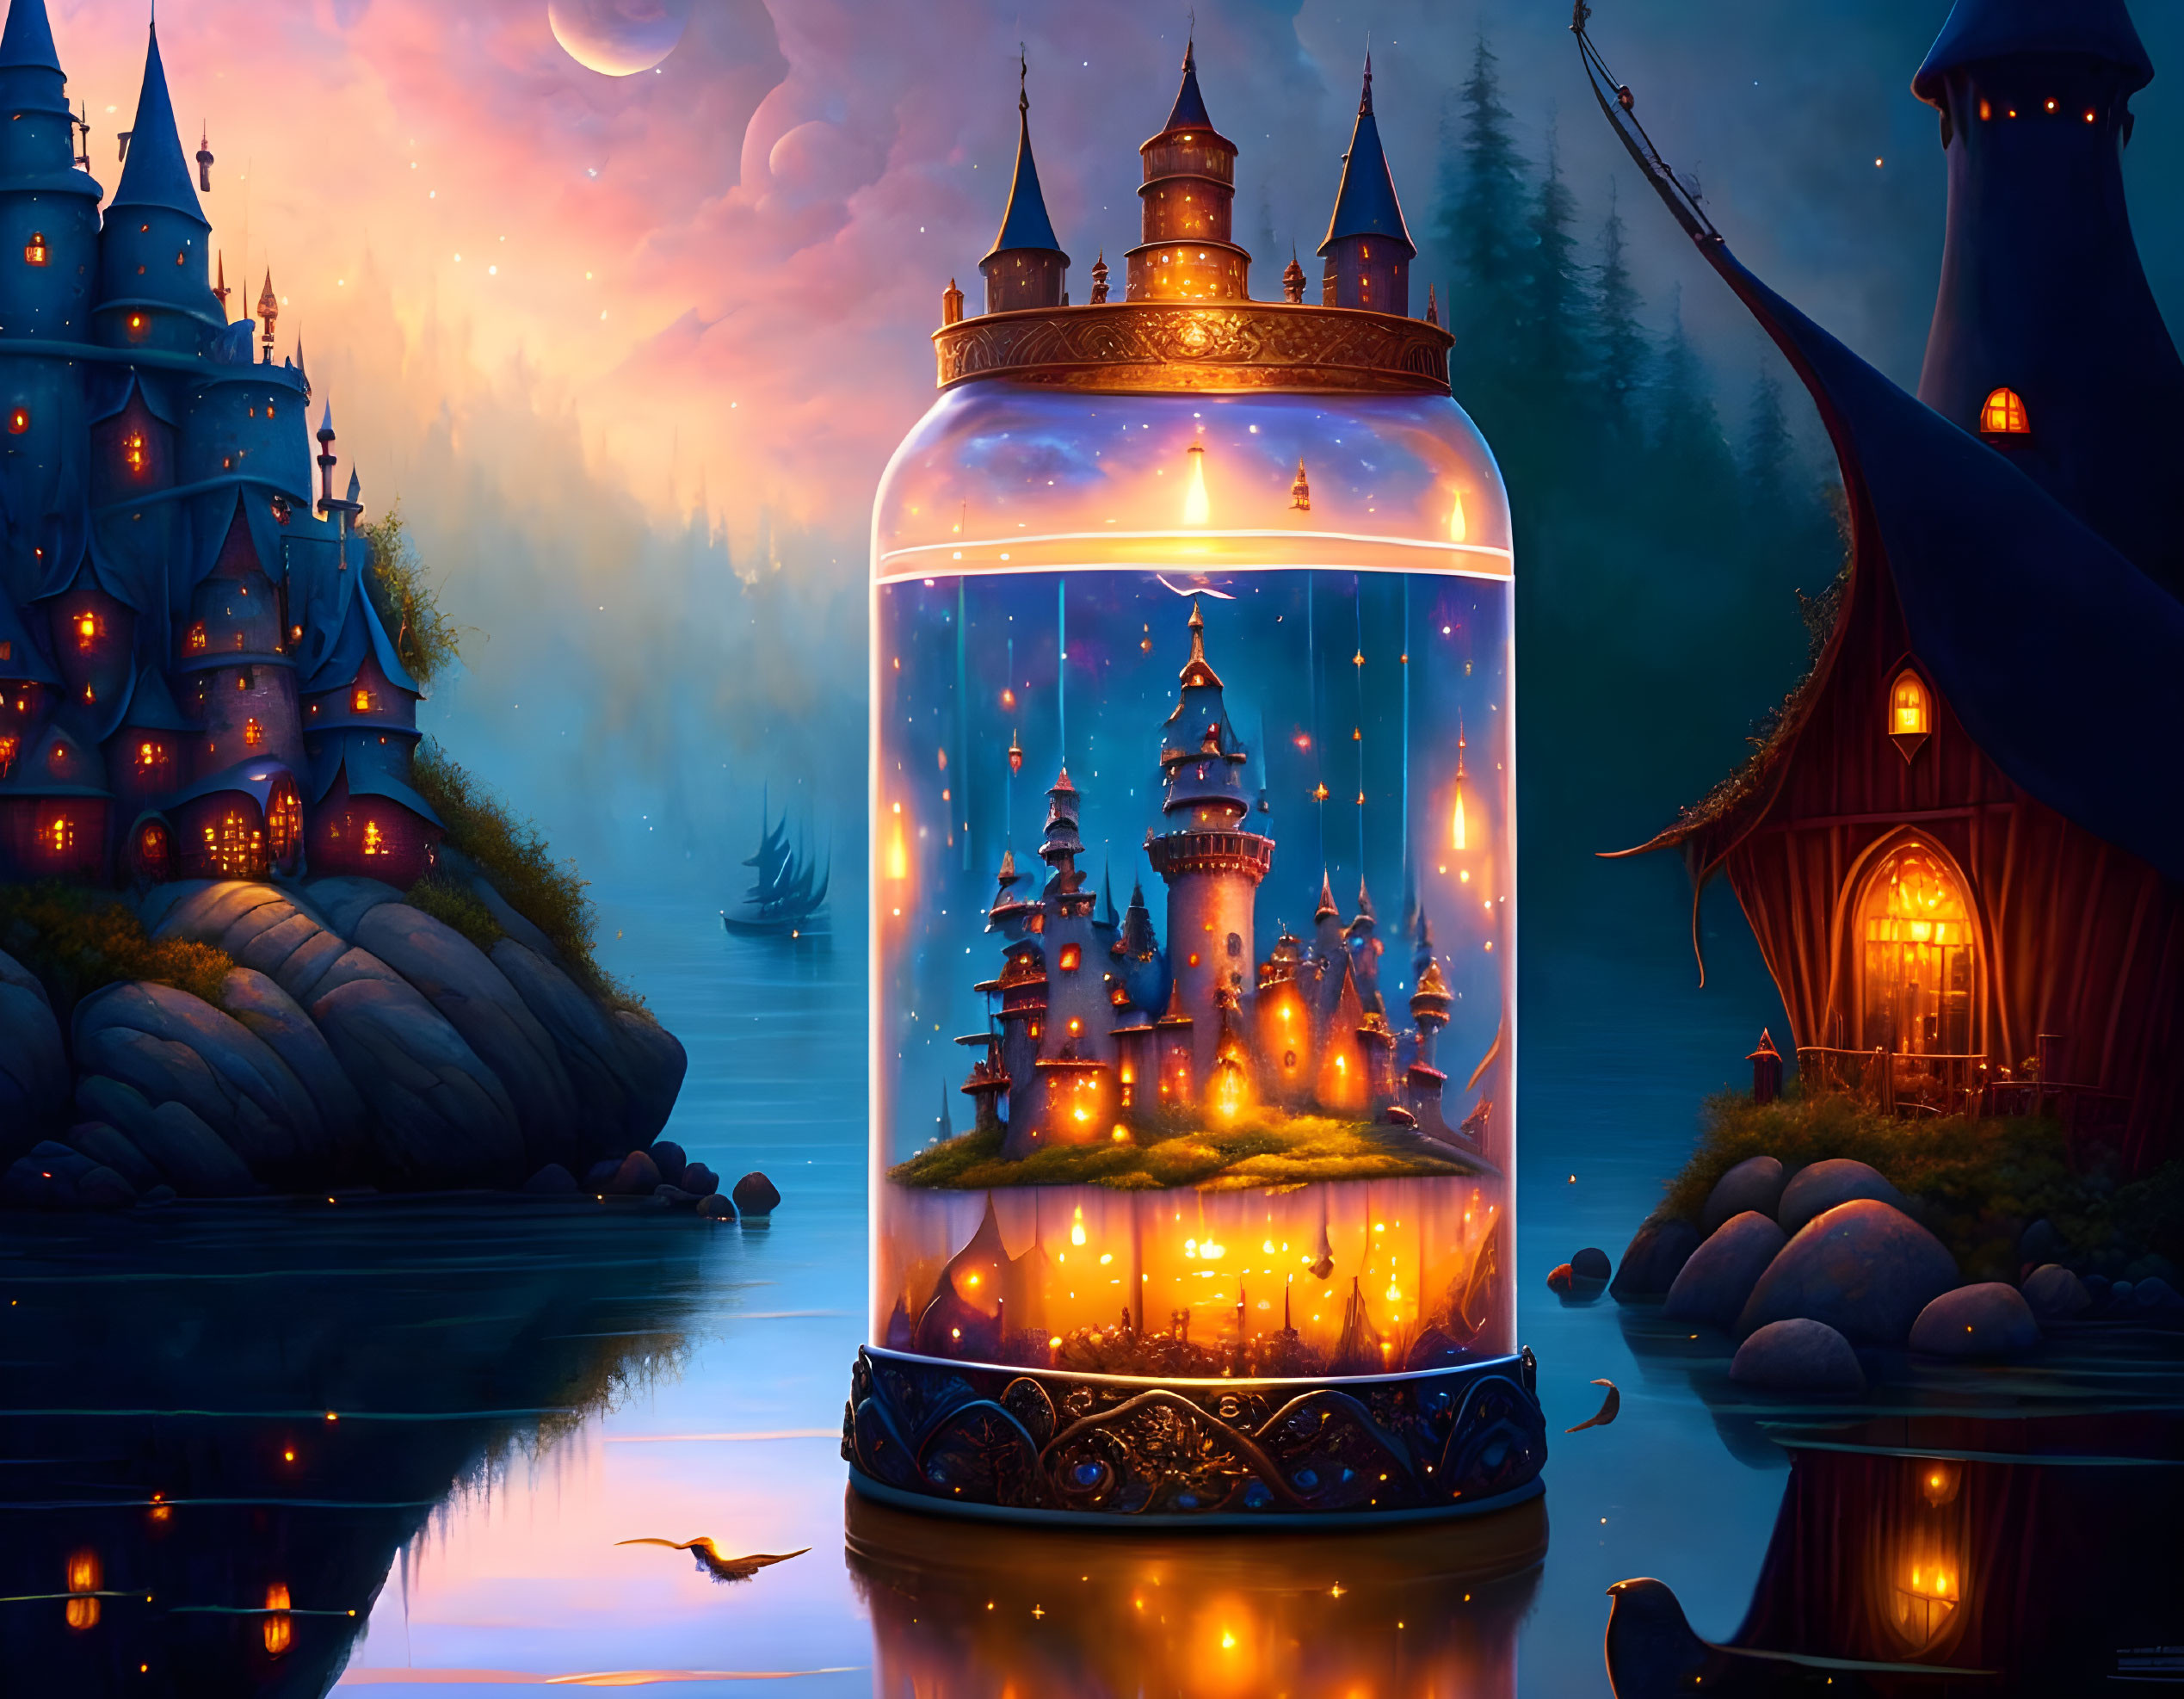 A magician's castle, spellbound in a jar